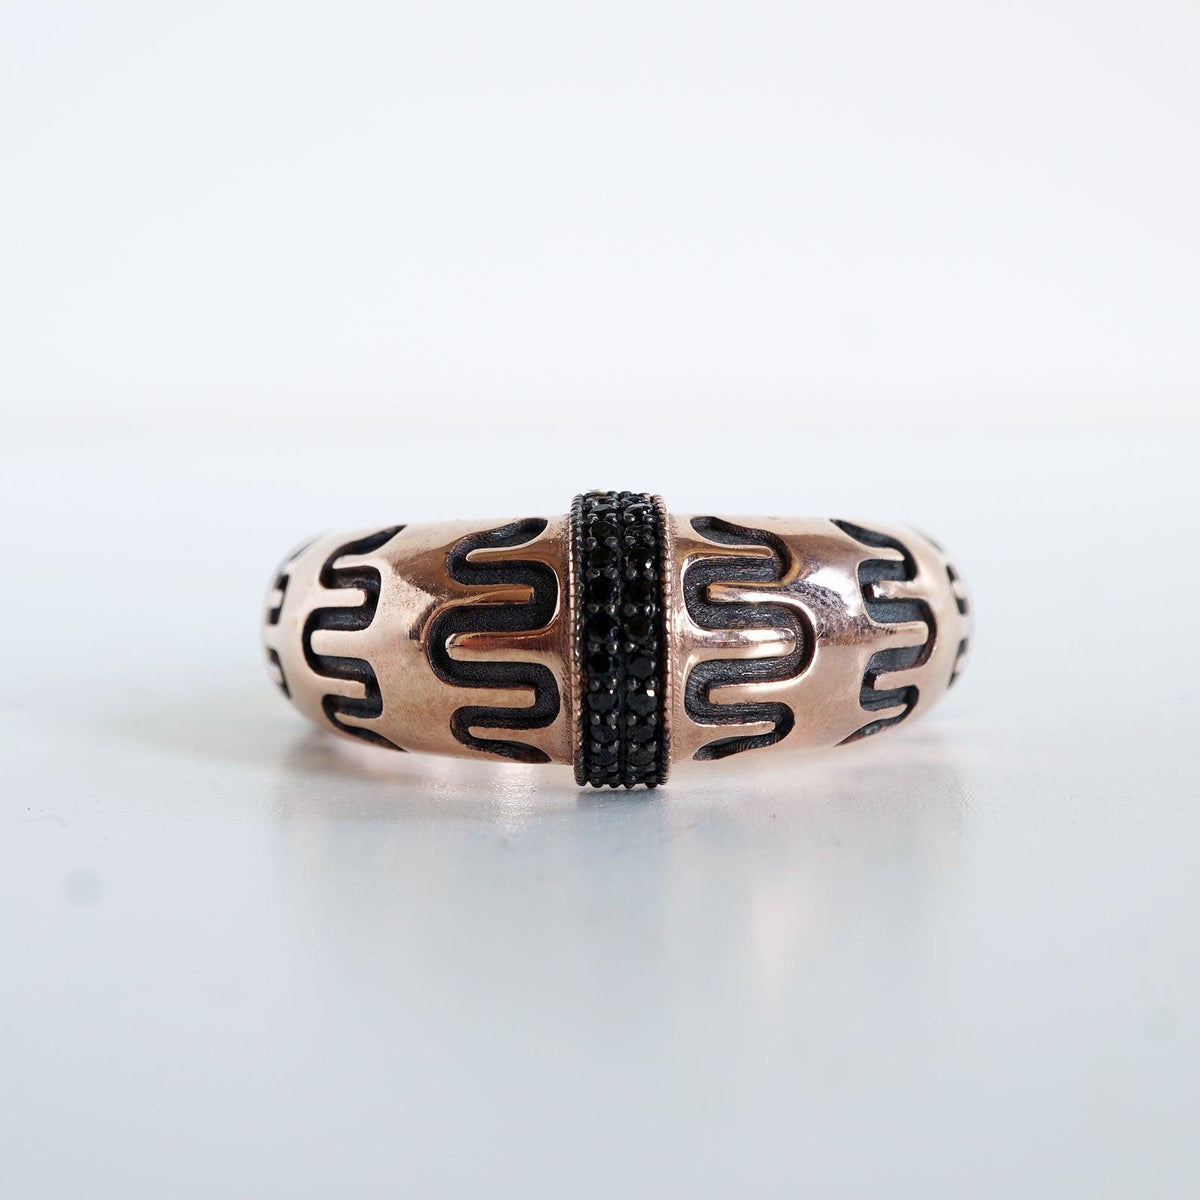 Maze Black Diamond Ring in Sterling Silver and 14K Gold, 9mm